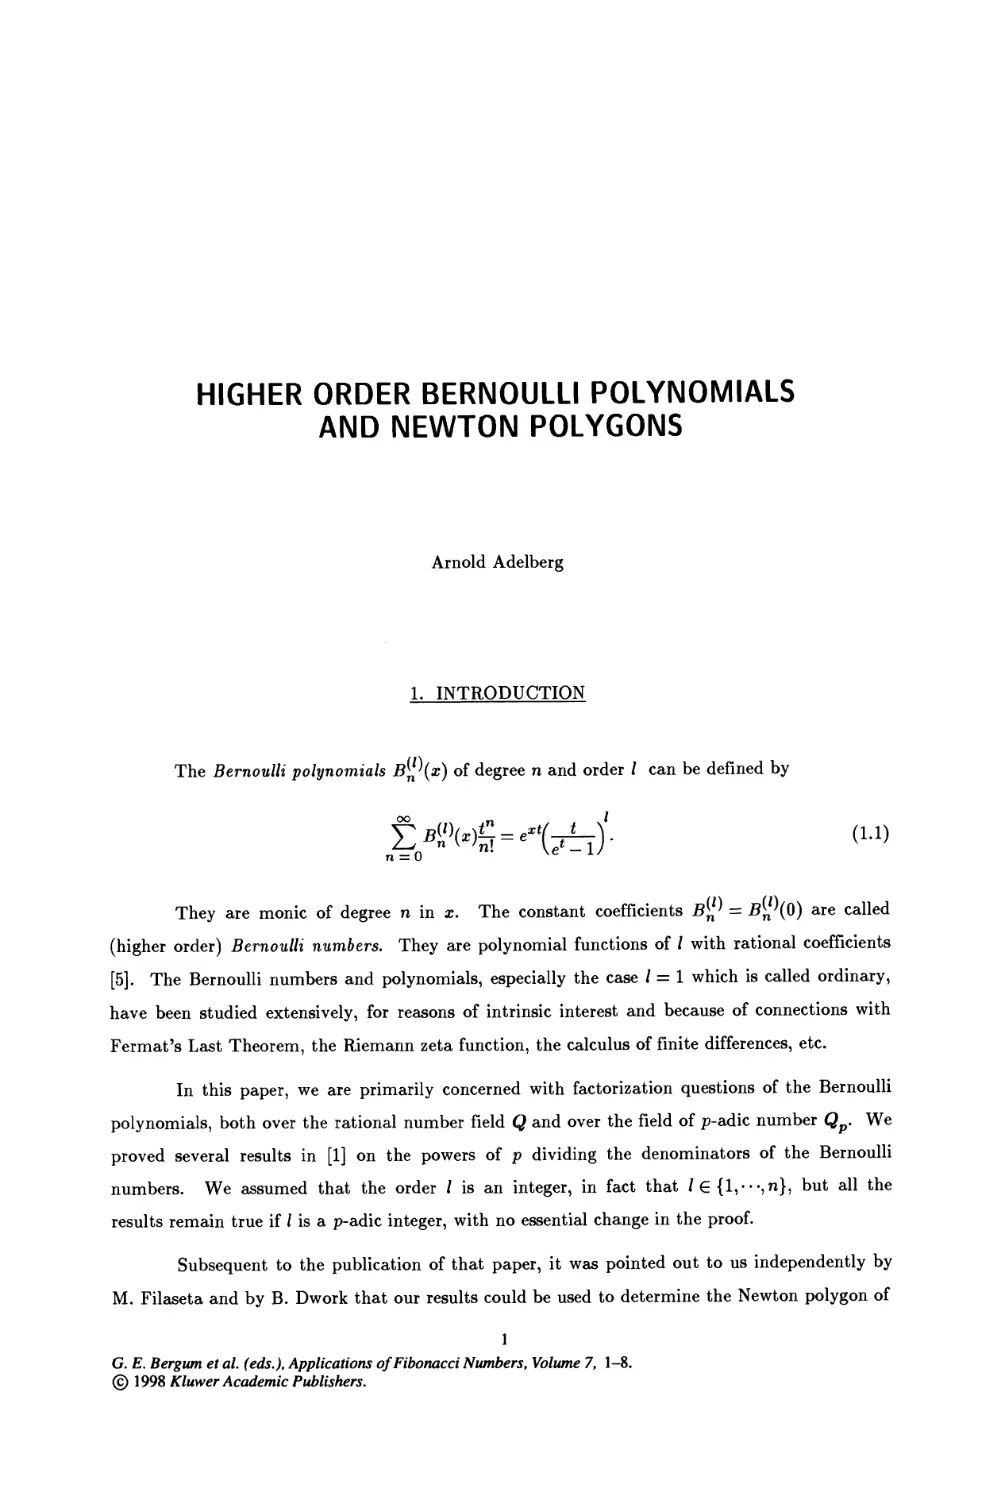 1. Higher Order Bernoulli Polynomials and Newton Polygons